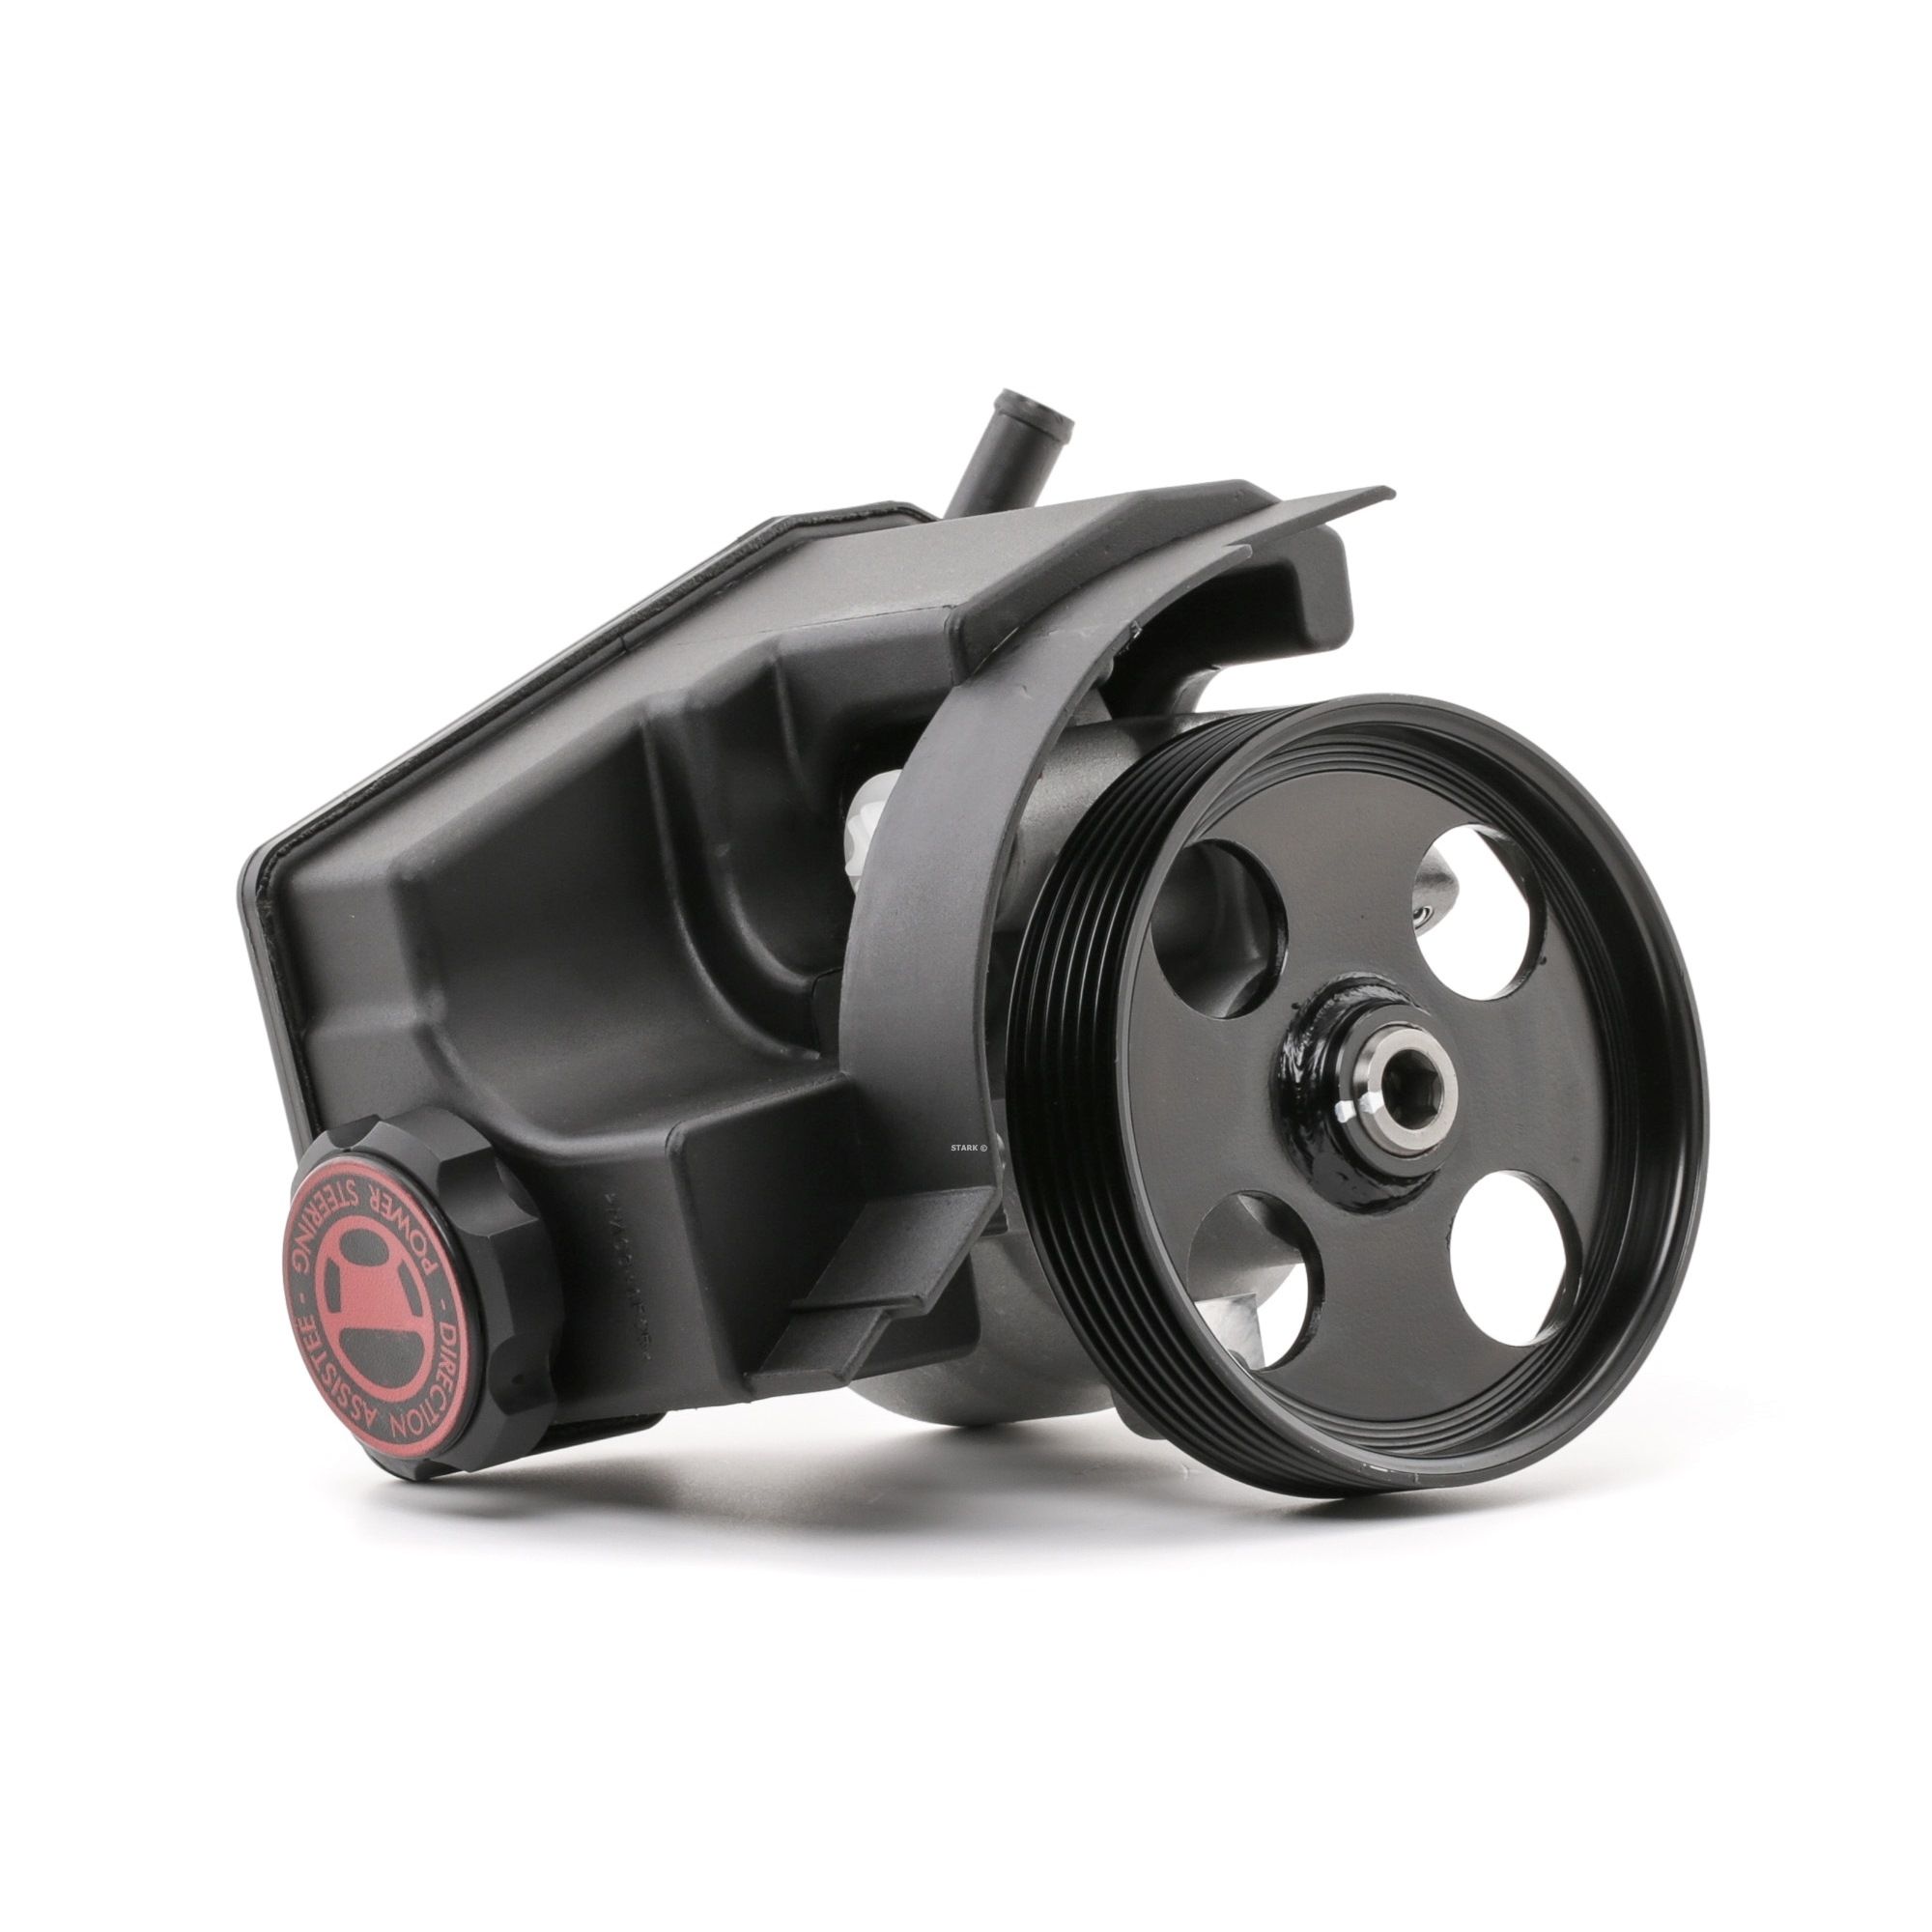 STARK SKHP-0540072 Power steering pump Hydraulic, Number of ribs: 6, Belt Pulley Ø: 114 mm, M16 X 1.5mm (Female), 60 l/h